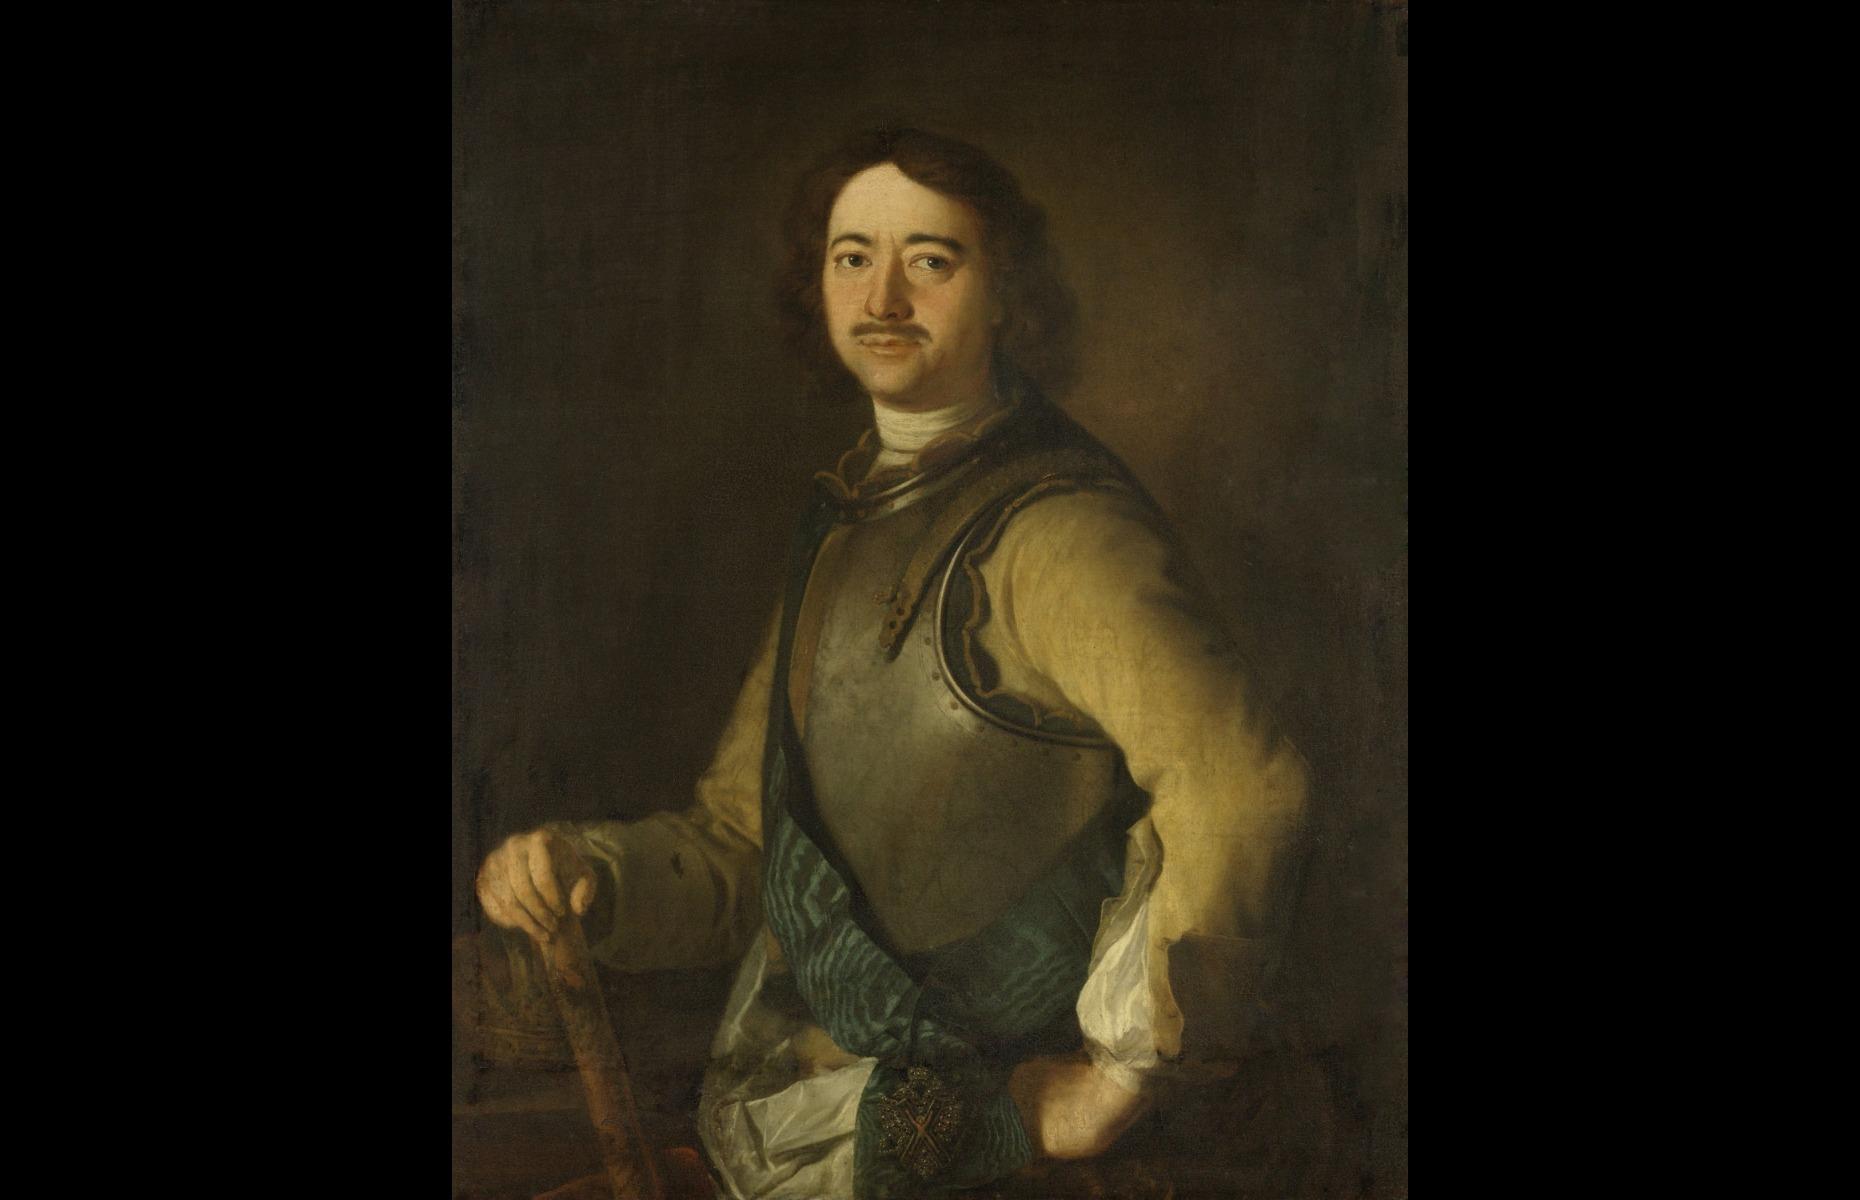 The popularity of Peter the Great